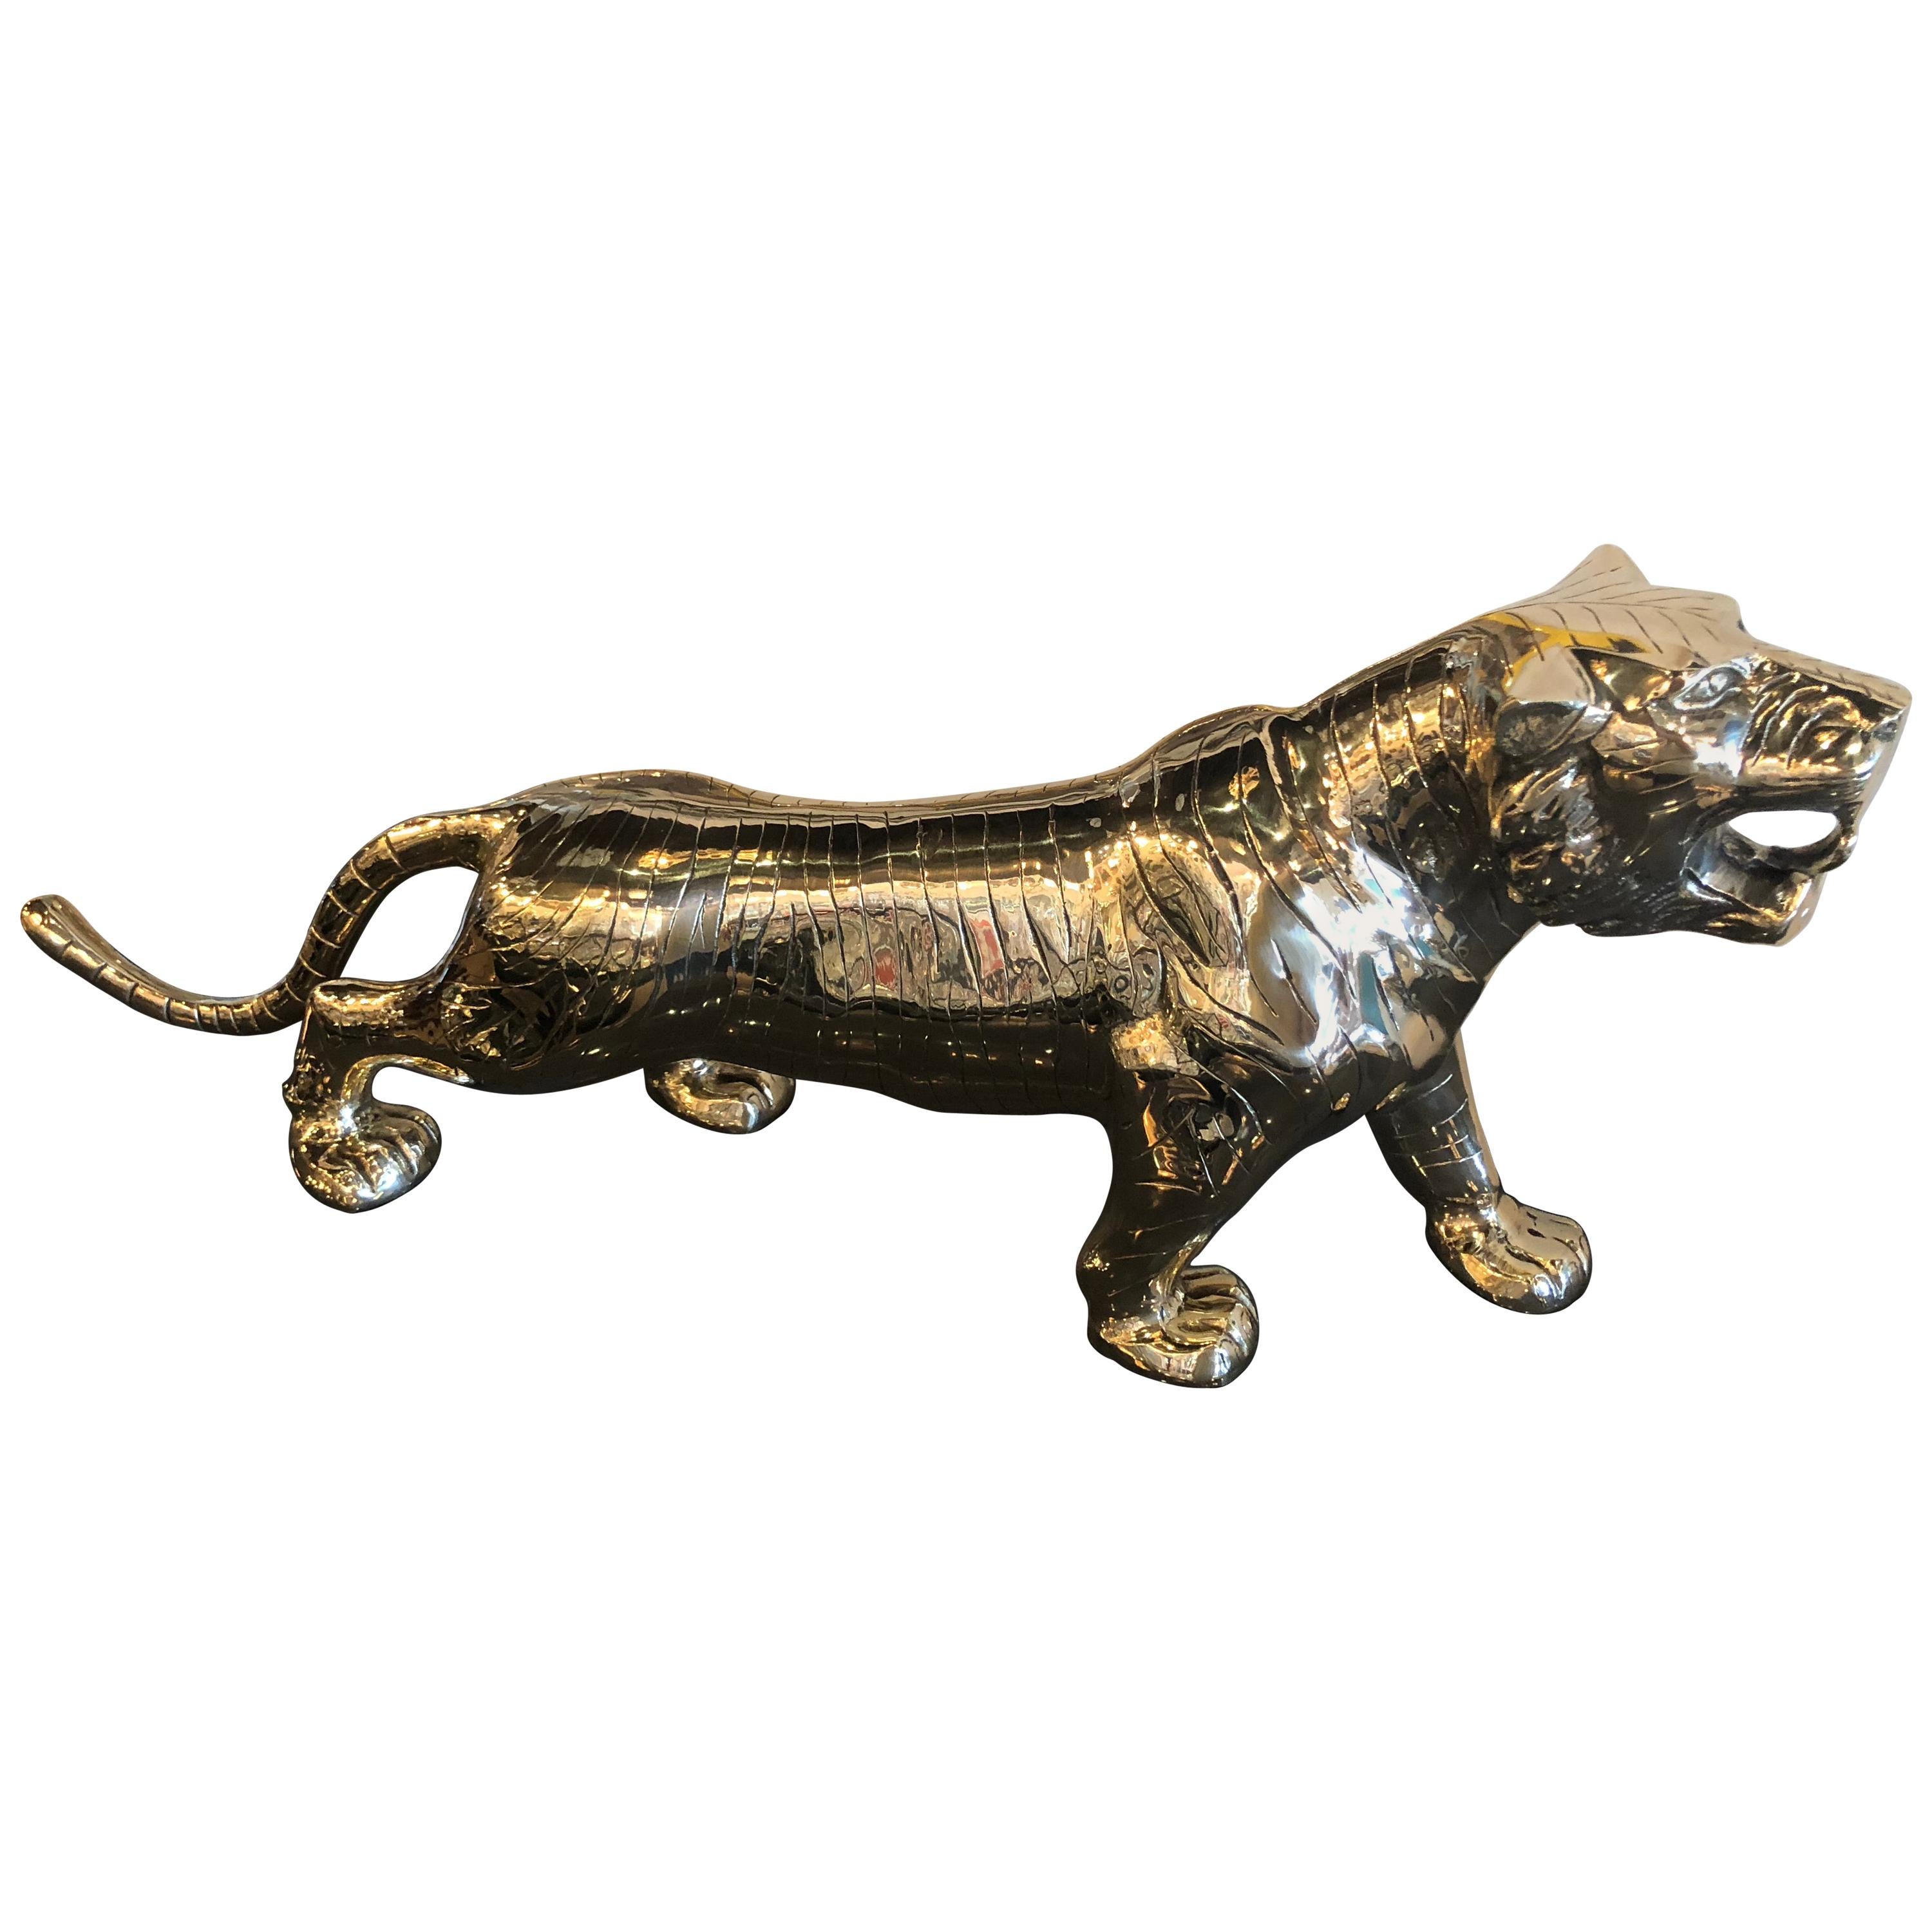 Vintage Polished Brass Preying Tiger Statue Pair Available